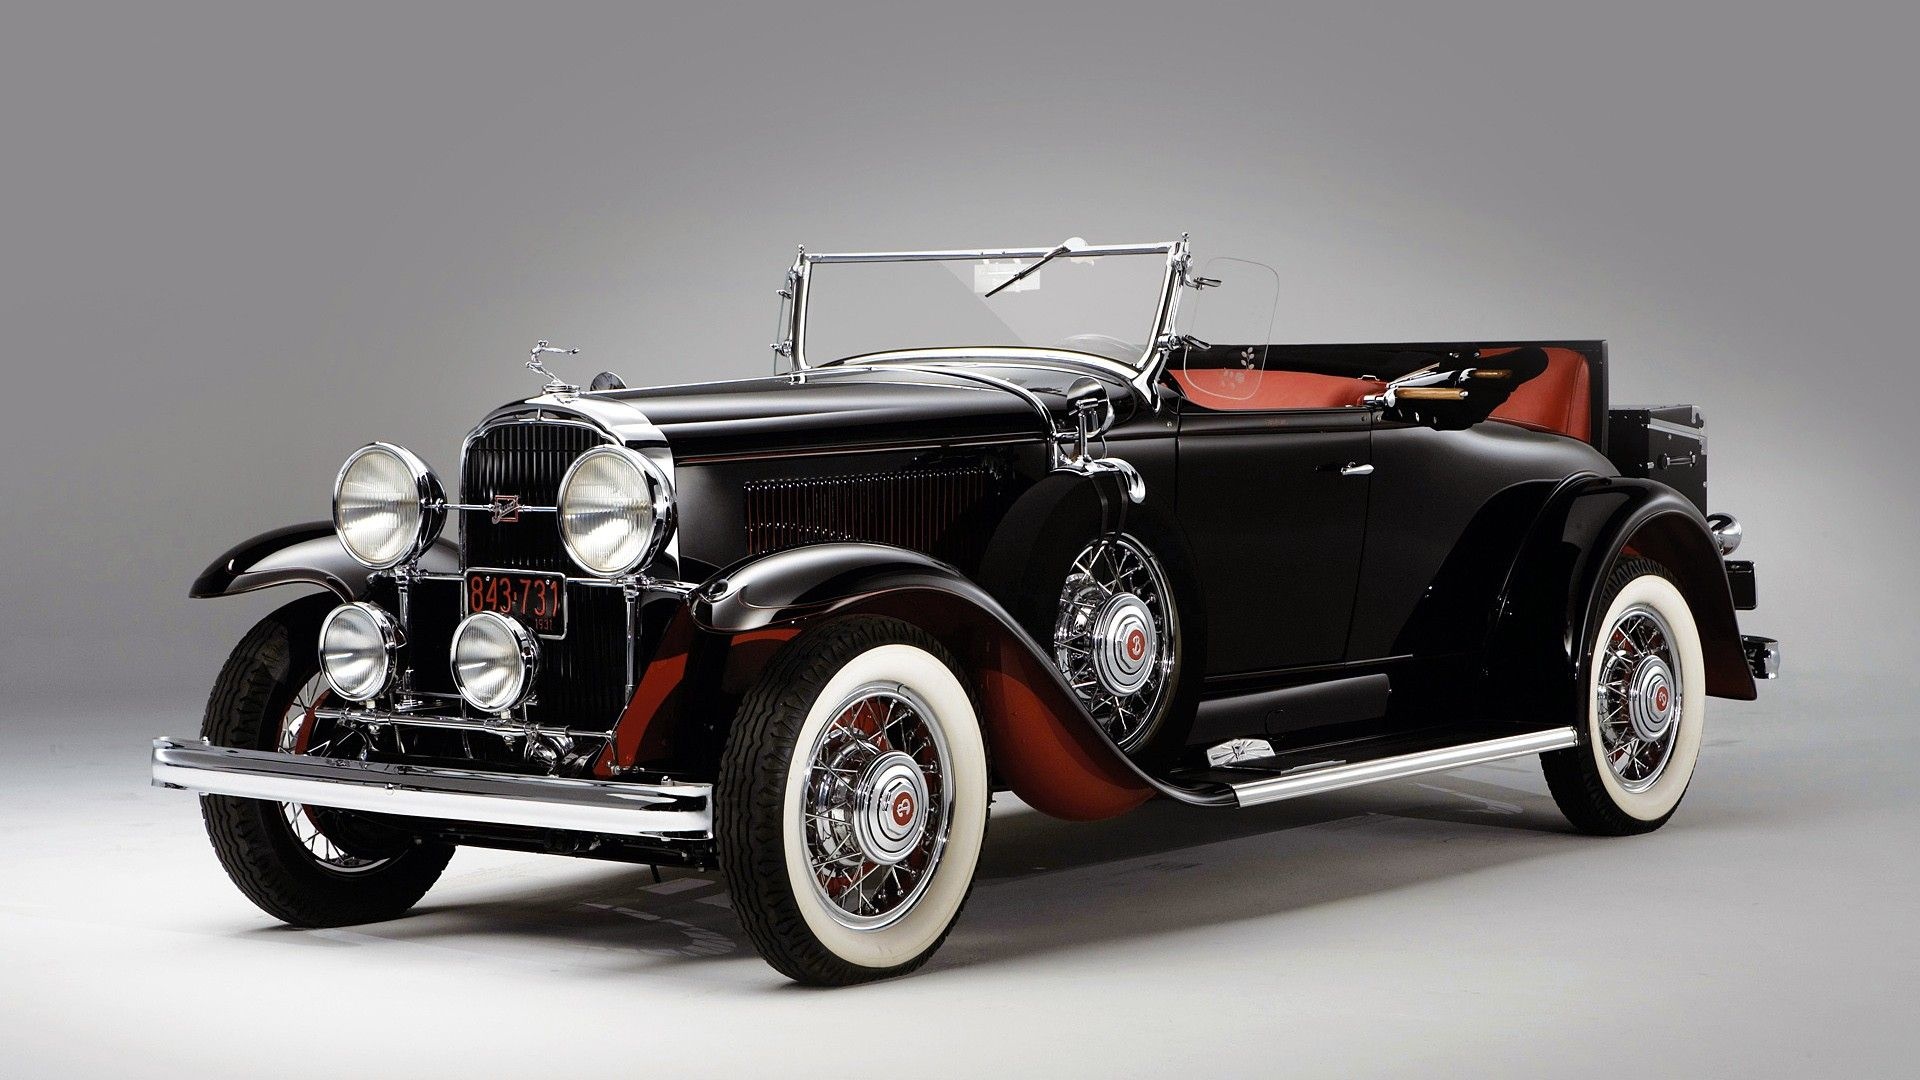 Vintage Car: Retractable hardtop roofs or hydraulic suspension systems. 1920x1080 Full HD Background.